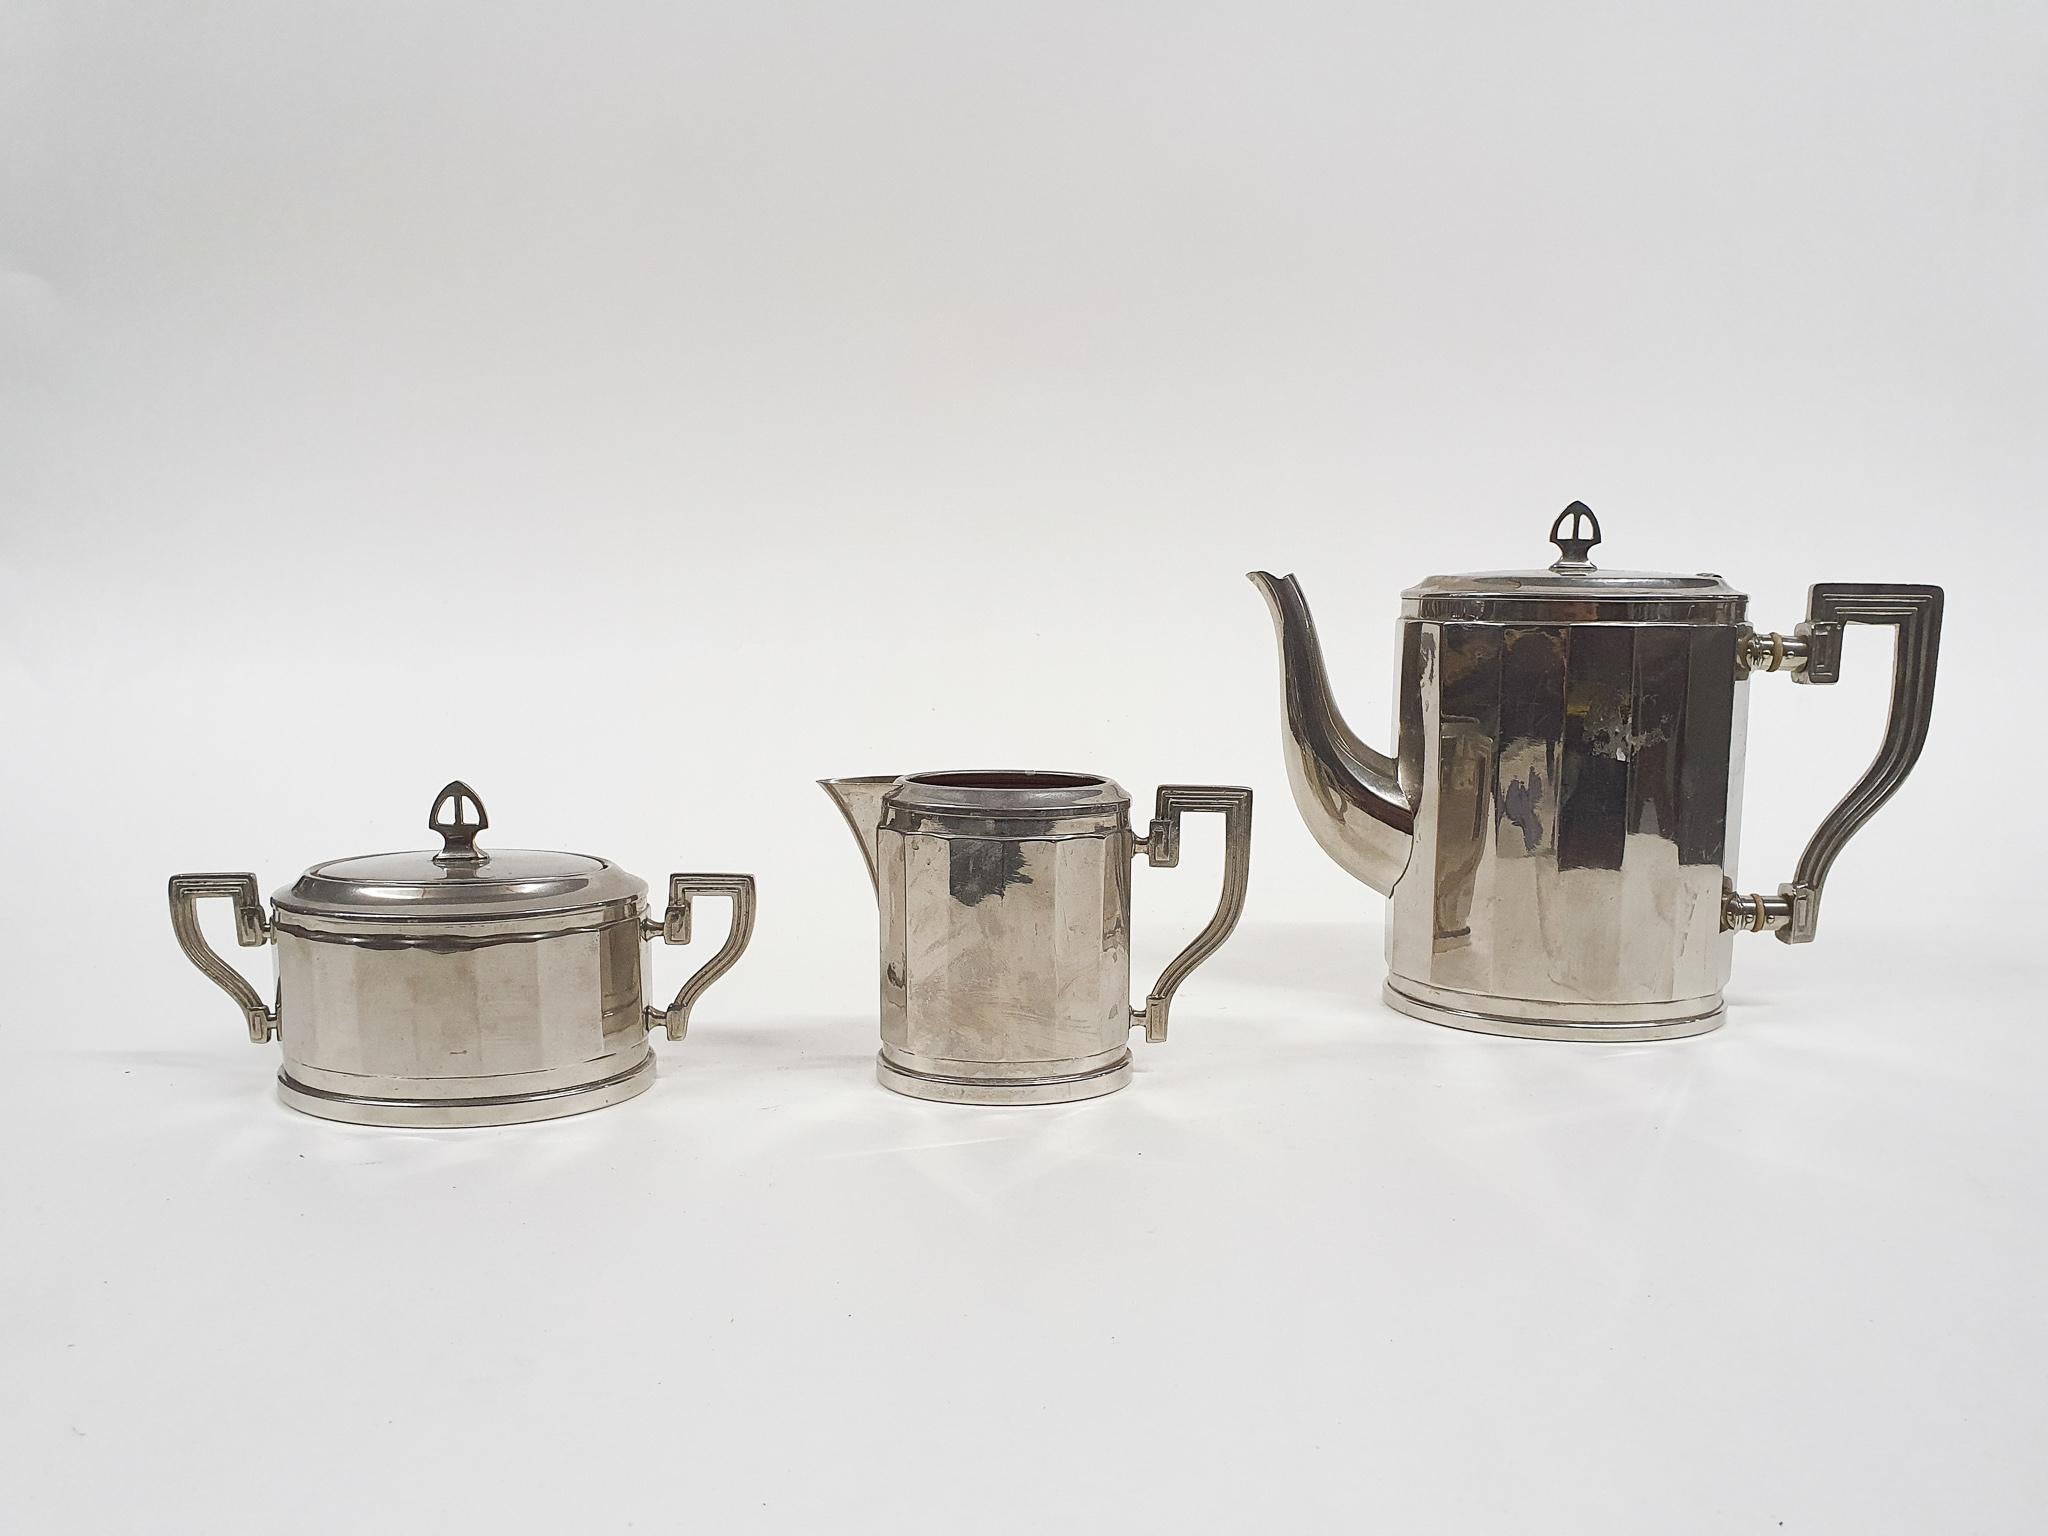 Silver colored tea pot, with milk can and sugar pot.
Teapot: 25 x 9 x 20 cm (LxWxH)
Milk can: 14.5 x 6 x 10cm (LxWxH)
Sugar pot: 20 x 9 x 10cm (LxWxH)